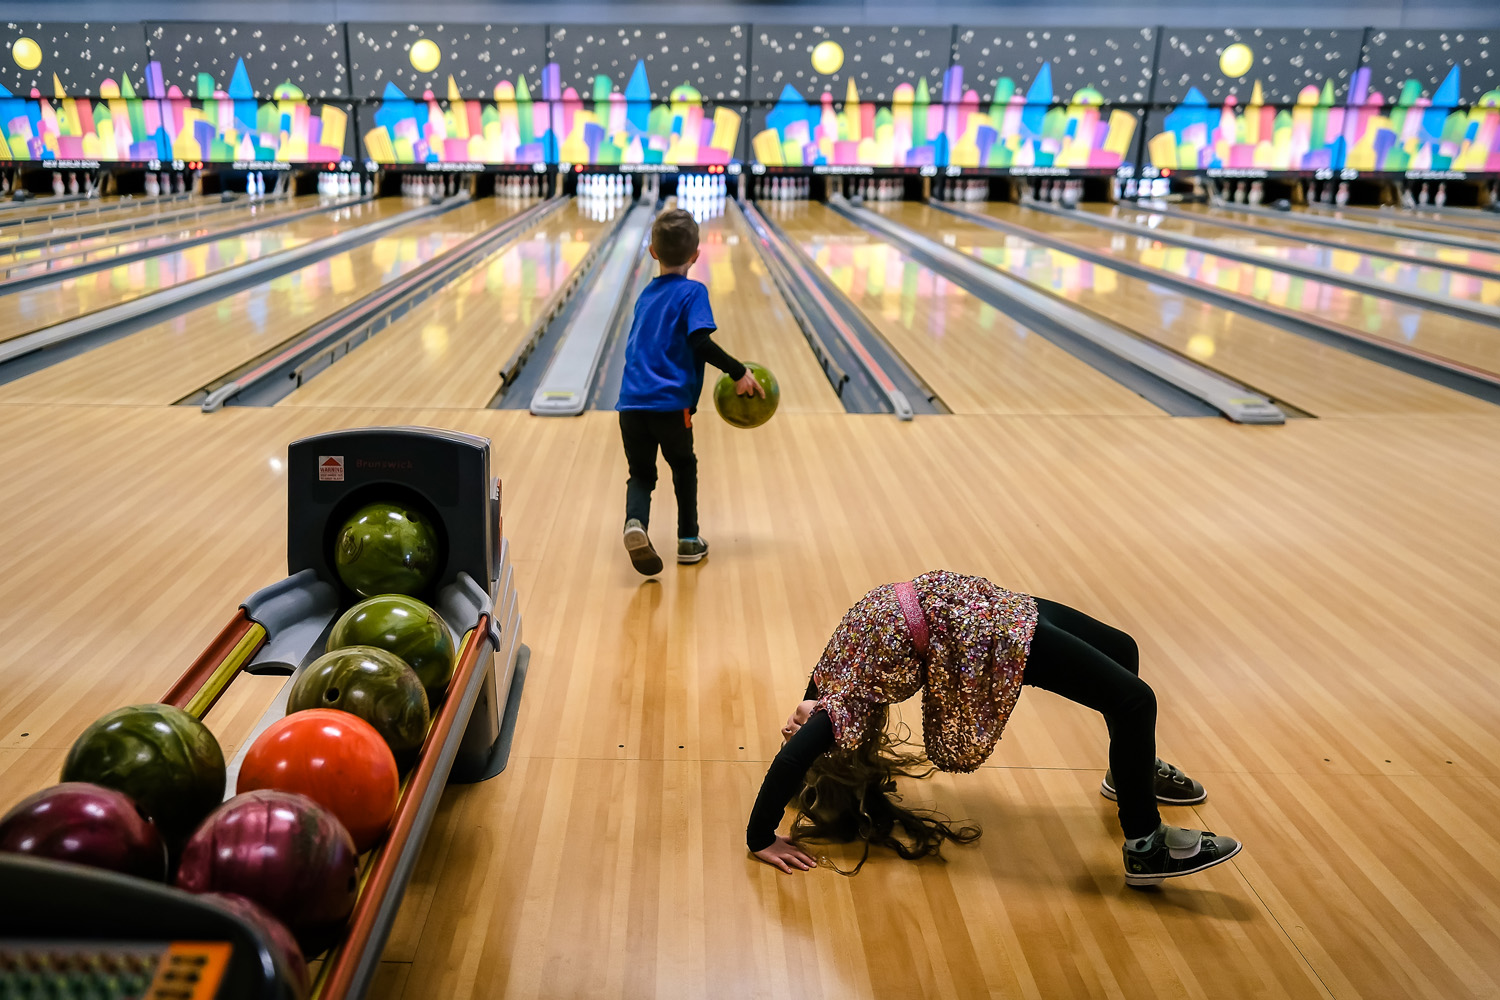 In a bowling alley a young girl performs 'the crab' gymnastics move, while a young boy bowls in the background